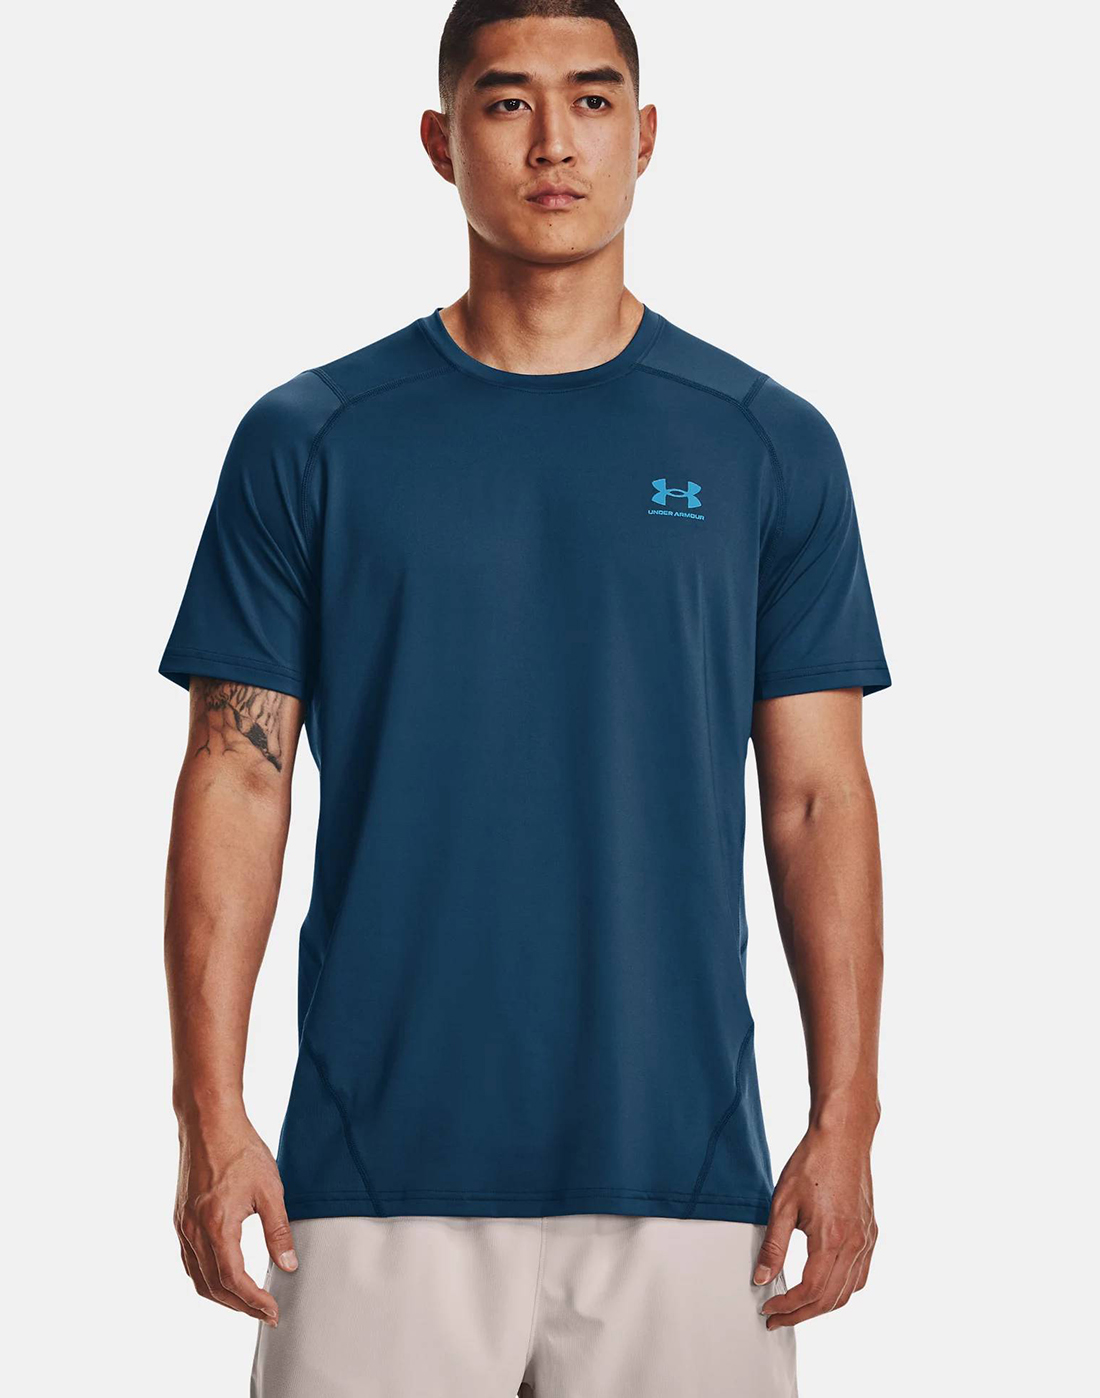 Under Armour Mens Armor Fitted T-Shirt - Blue | Life Style Sports IE